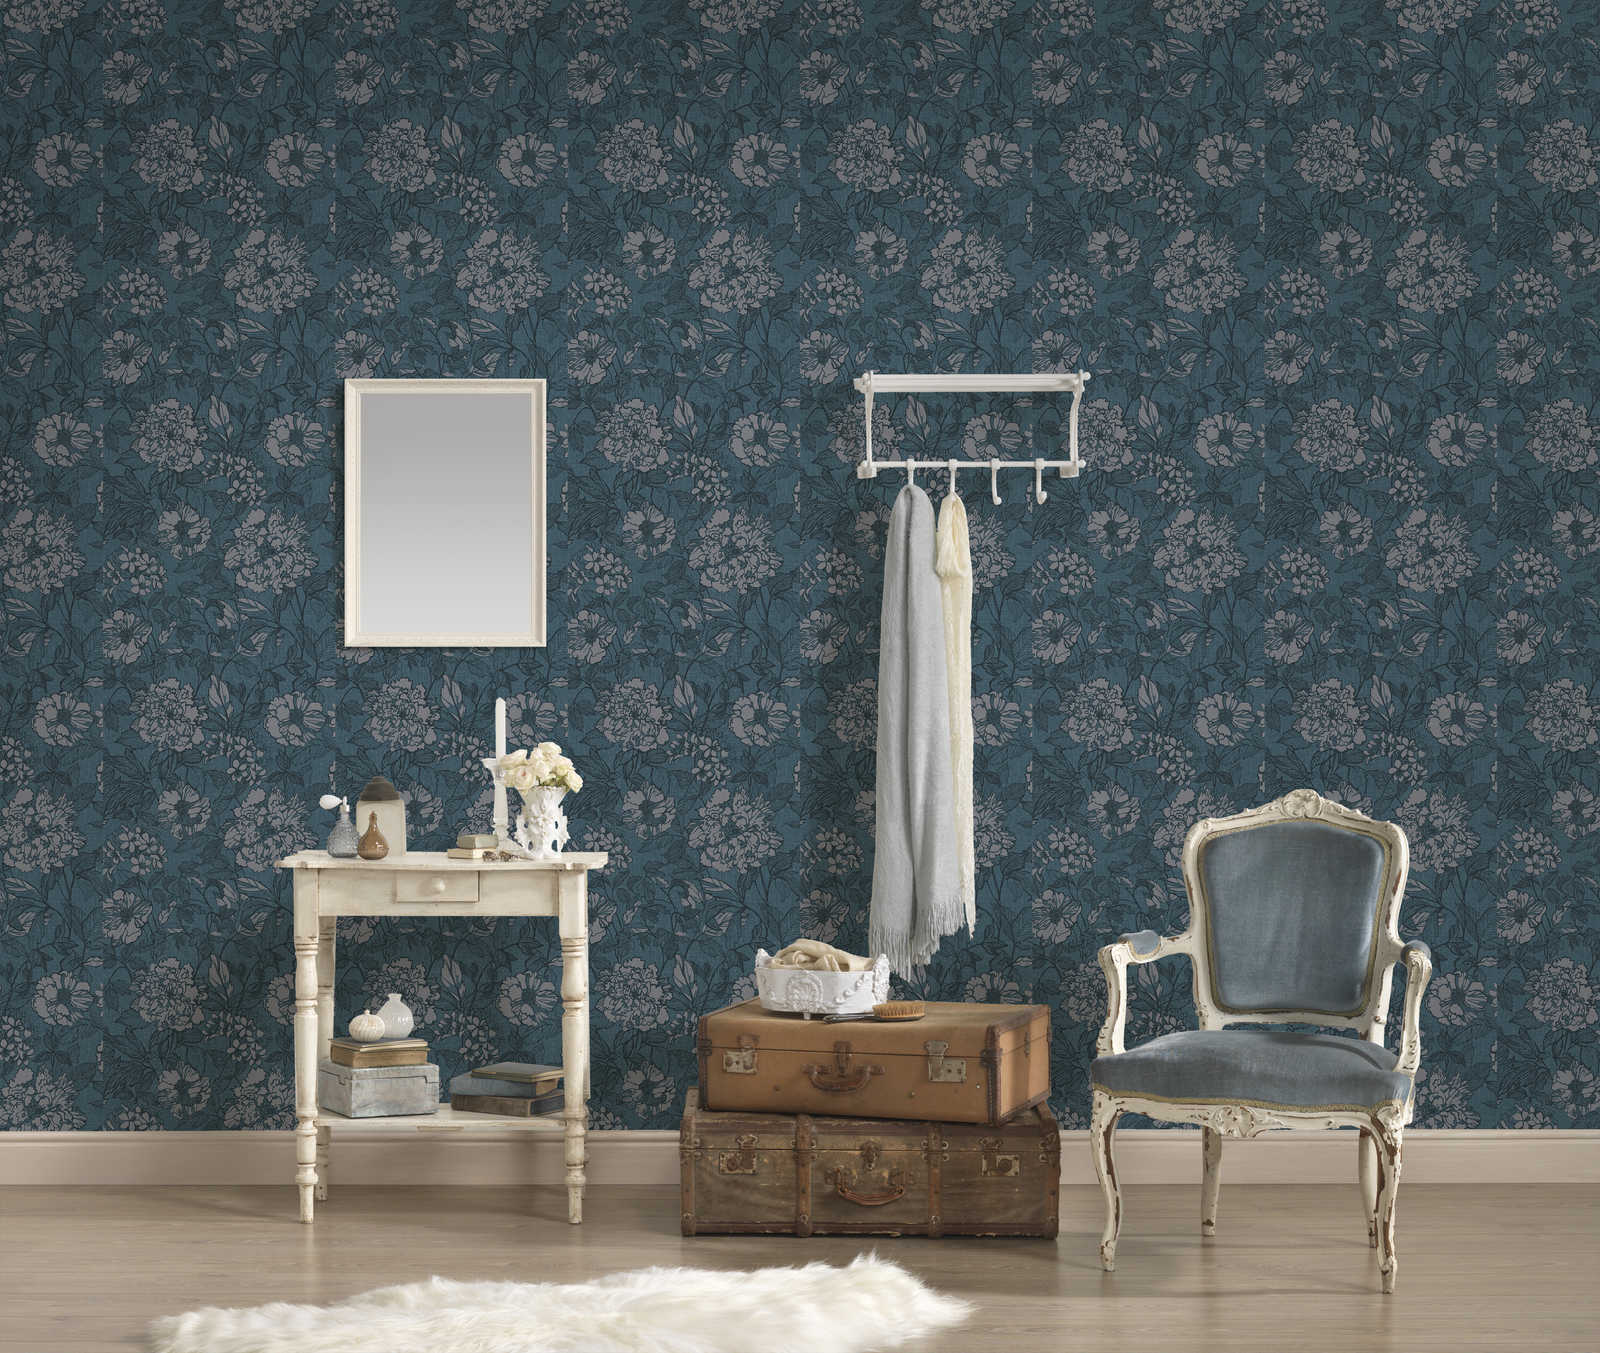             Textile-look wallpaper petrol with floral pattern - blue, grey
        